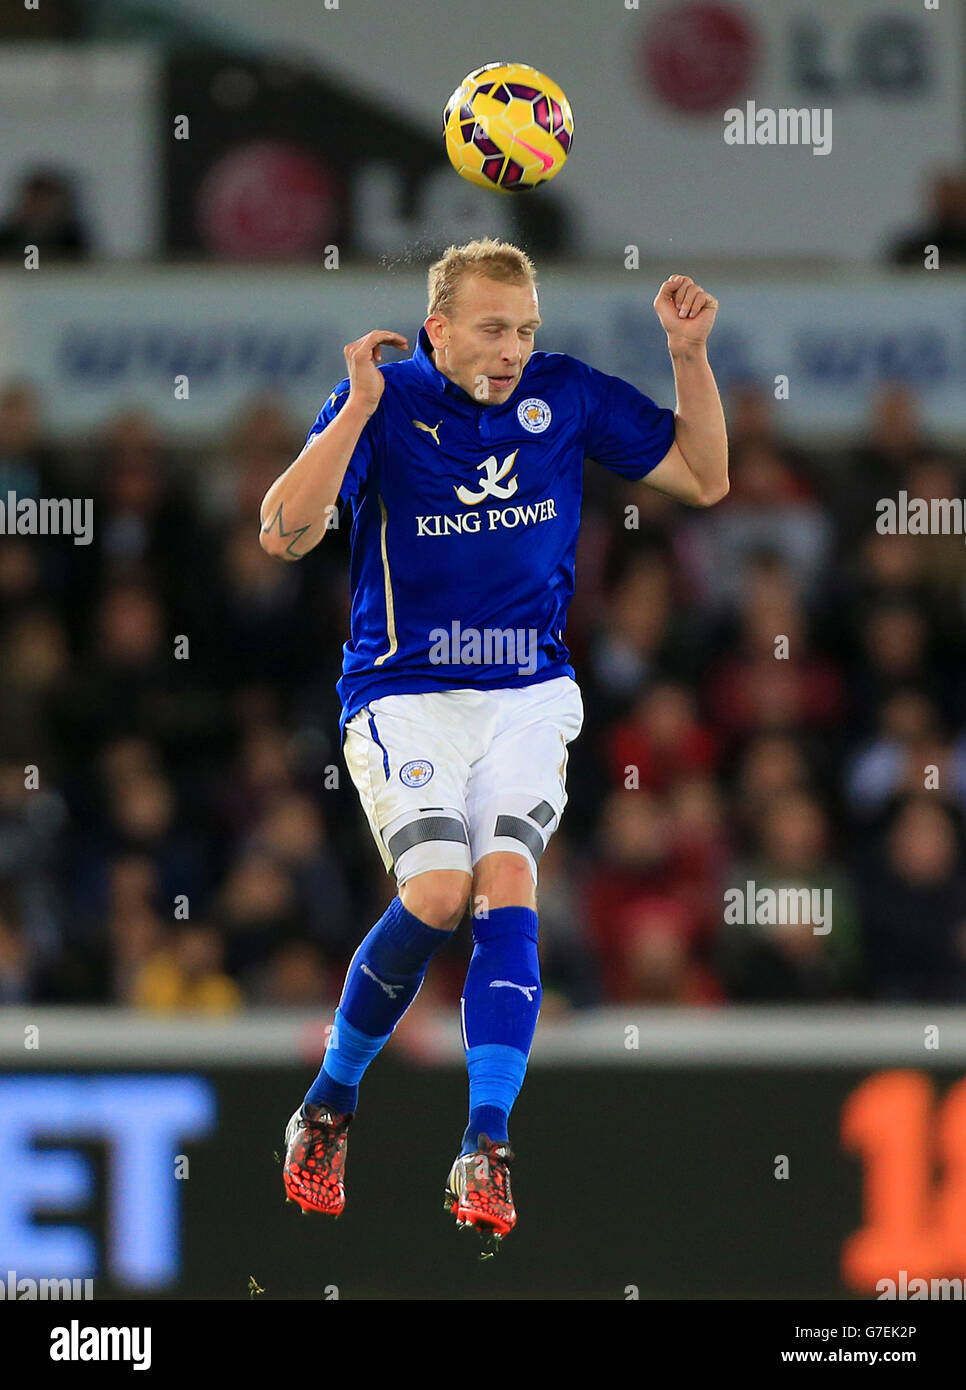 Leicester City's Ritchie De Laet in action during the Barclays Premier League match at The Liberty Stadium, Swansea. PRESS ASSOCIATION Photo. Picture date: Saturday October 25, 2014. See PA story SOCCER Swansea. Photo credit should read Nick Potts/PA Wire. Maximum 45 images during a match. No video emulation or promotion as 'live'. No use in games, competitions, merchandise, betting or single club/player services. No use with unofficial audio, video, data, fixtures or club/league logos. Stock Photo